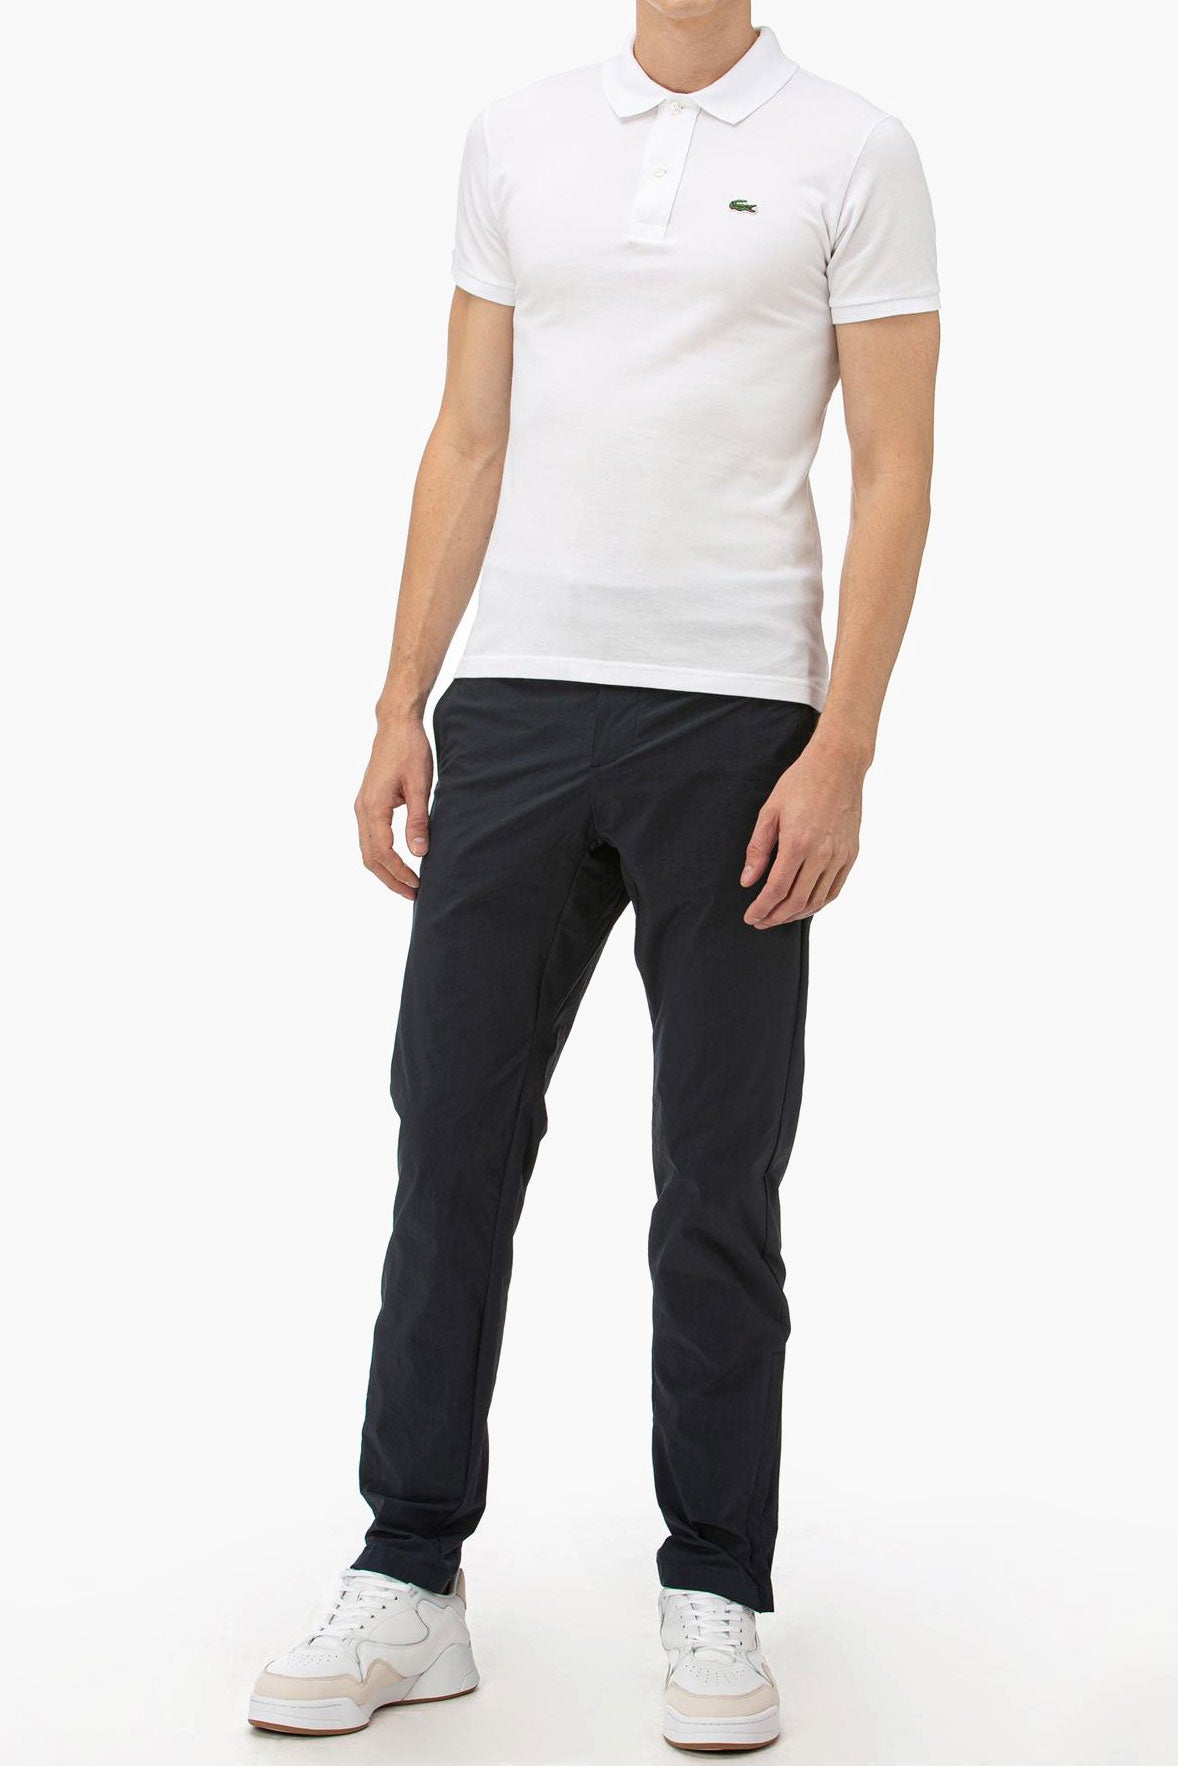 Lacoste - Lacoste Men's Motion Regular Fit Breathable Stretch Chino Pants